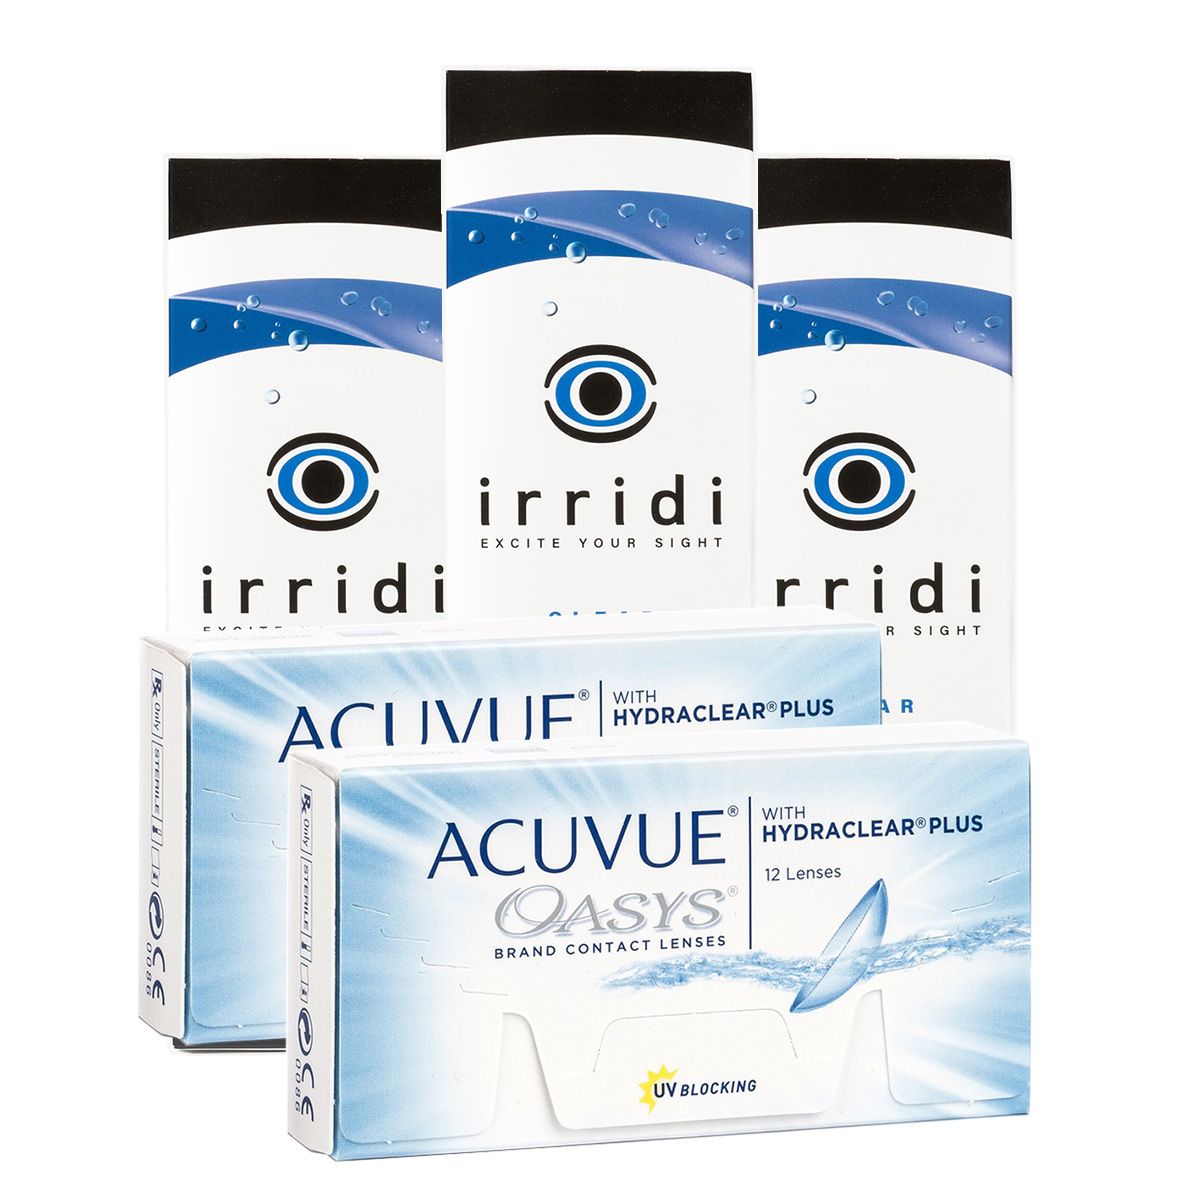 ACUVUE OASYS 6 MONTHS SUPPLY (24 LENSES + 3 SOLUTIONS)